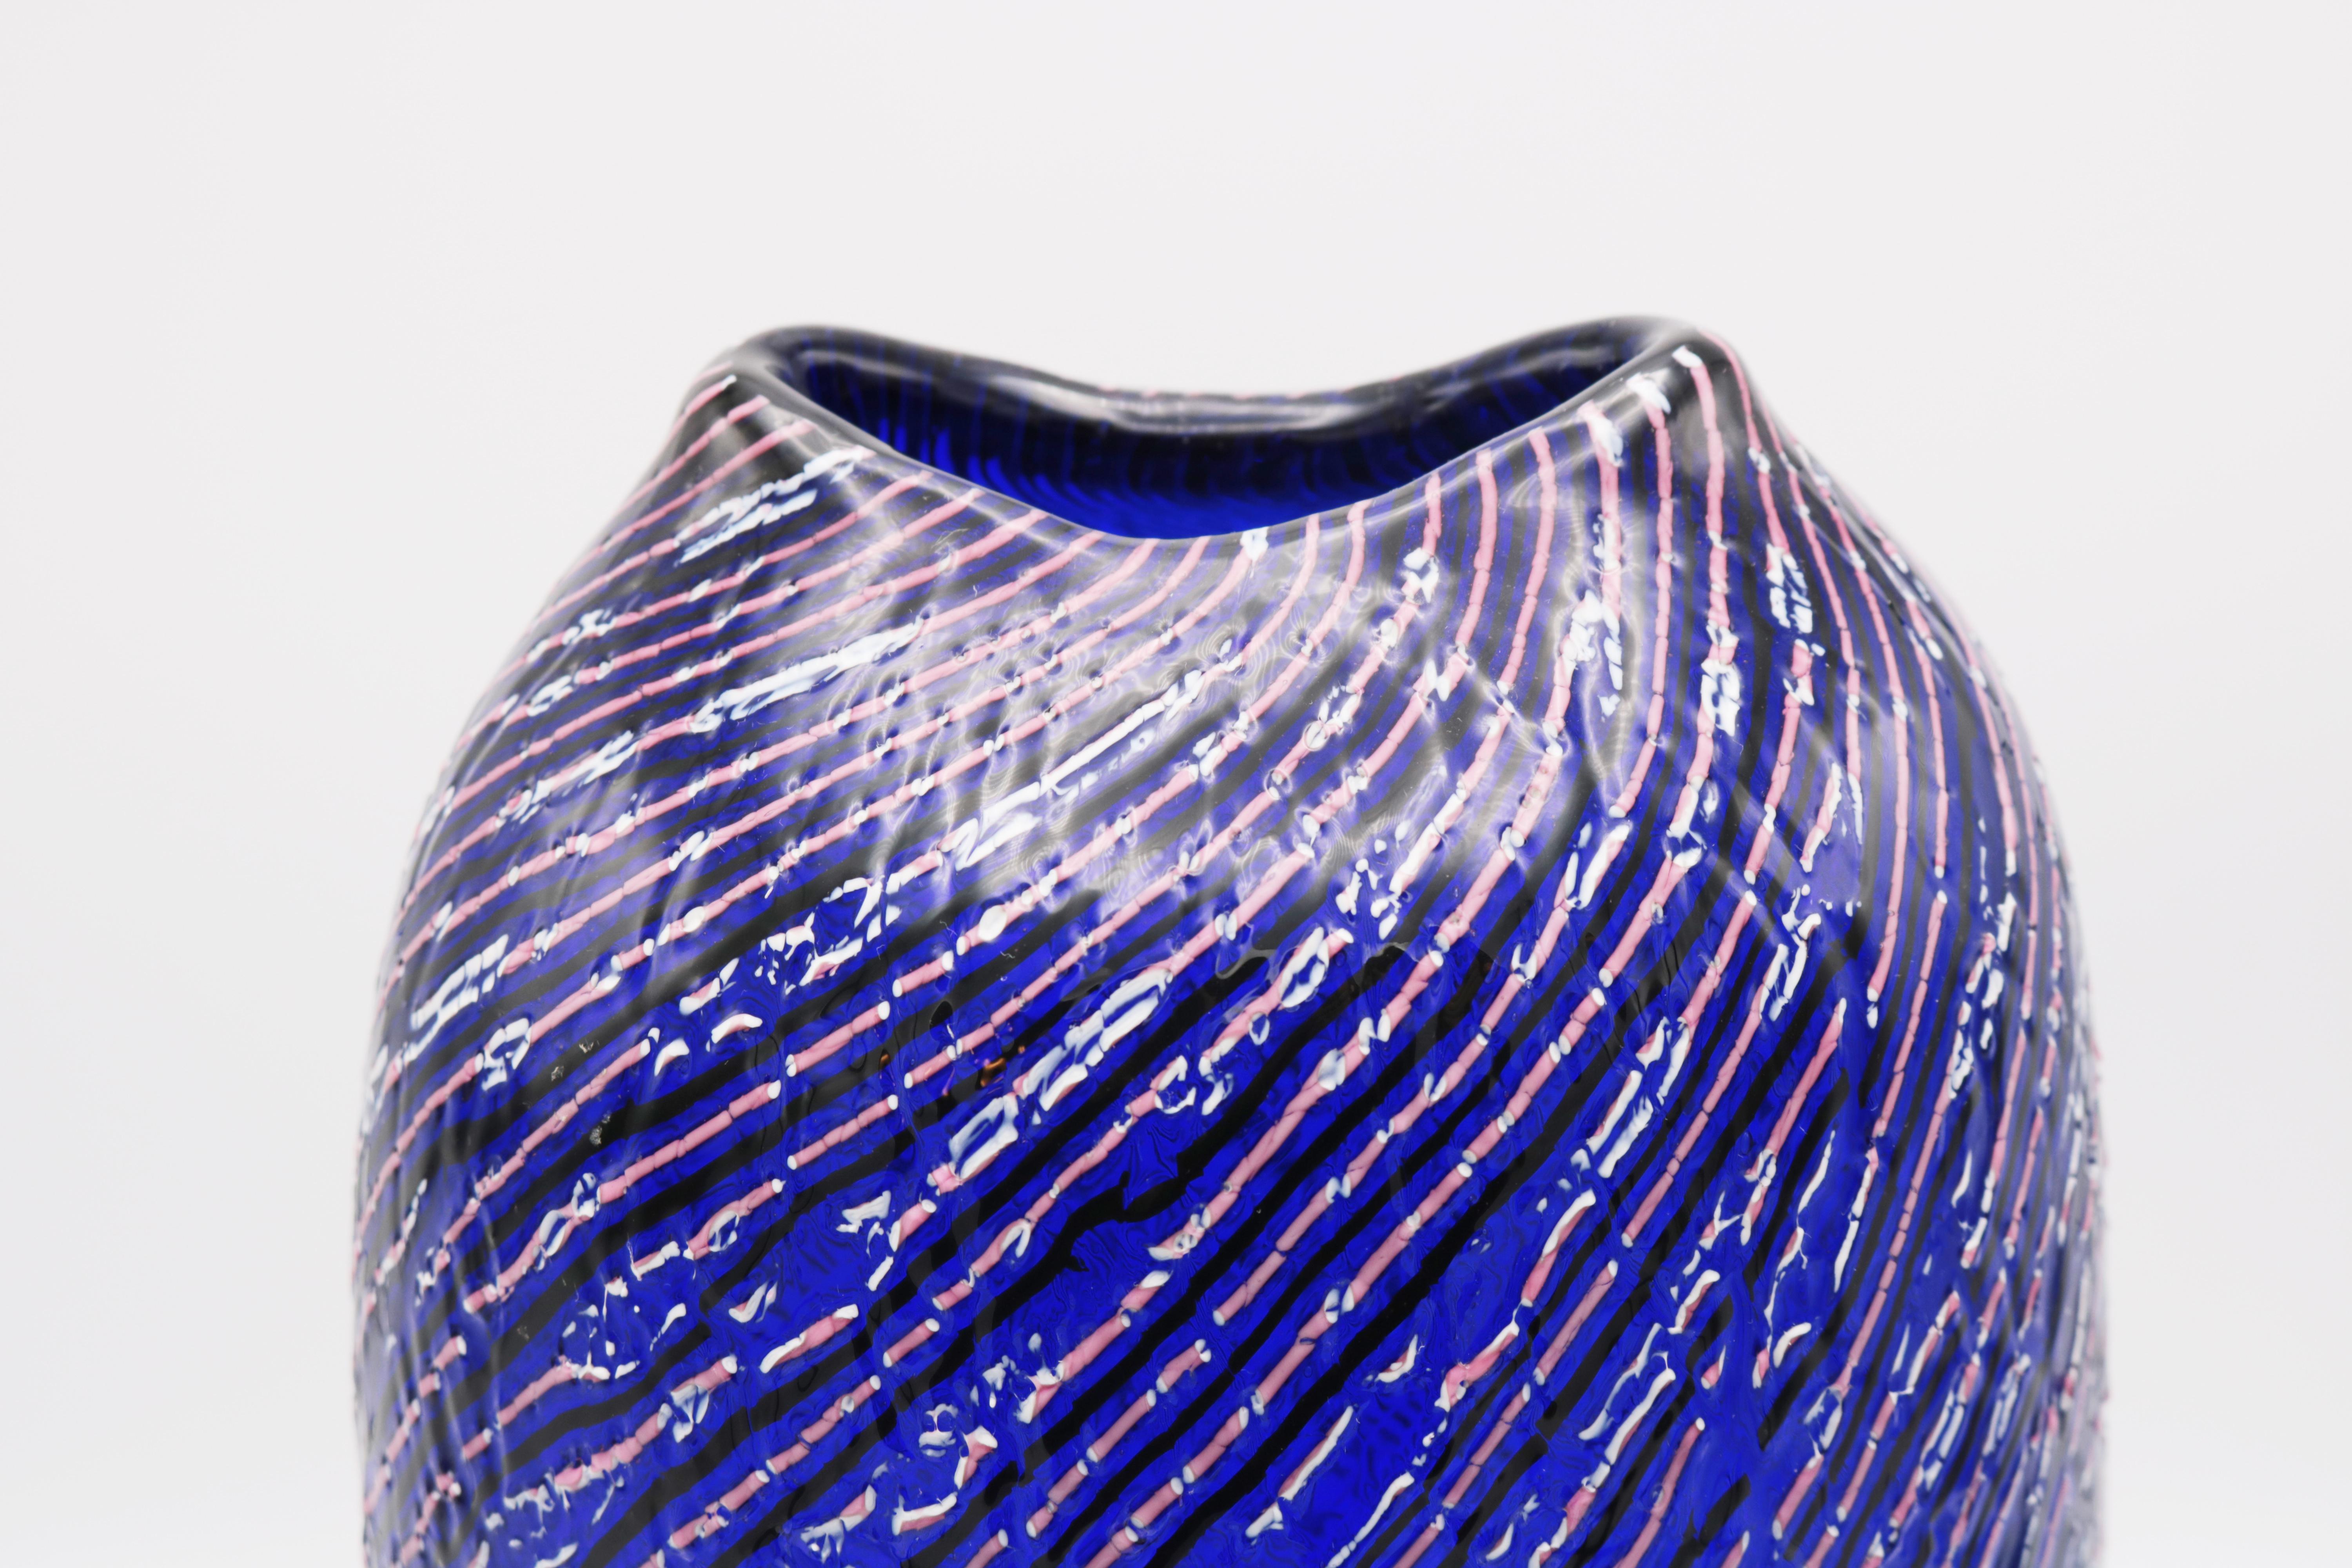 Lino Tagliapietra designed Italian art glass vase for Effetre International. Cased glass, clear and blue, fused ribbon, deep purple and pink/white. Craquelure. Marked: Effetre International Murano 1992 (engraved). Cased glass, clear and blue, fused